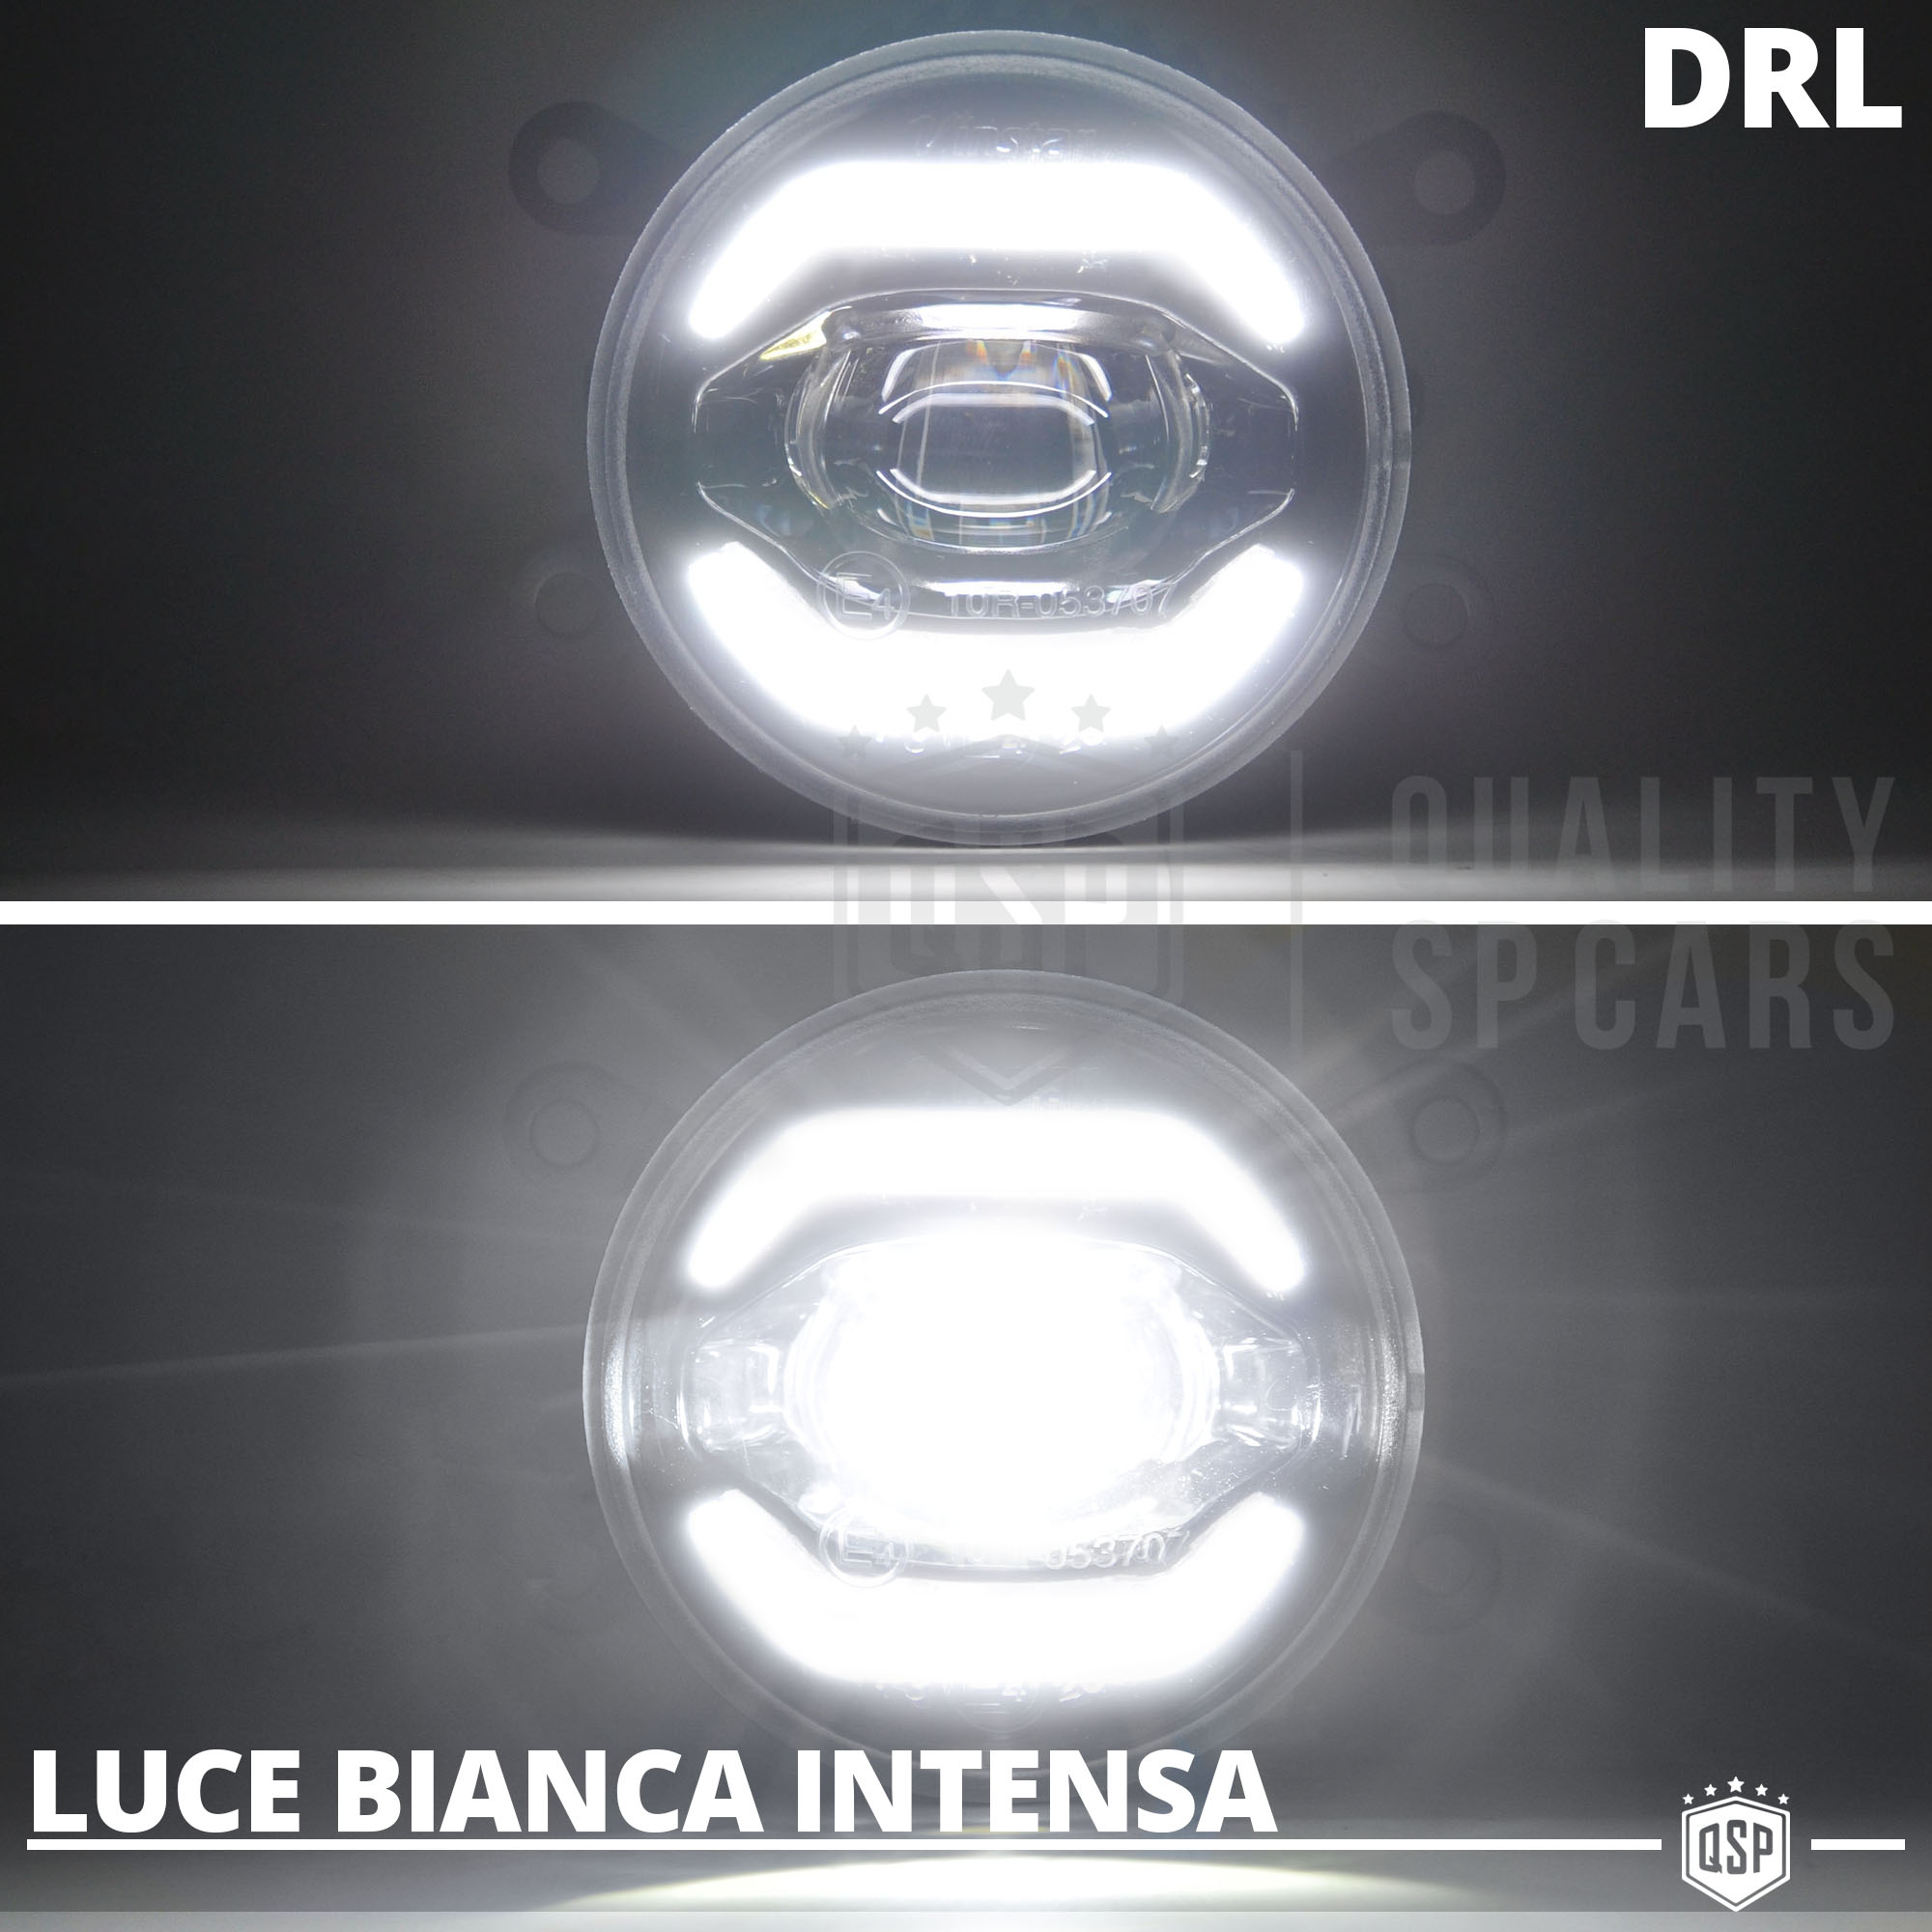 2 luce a 8 LED DRL antinebbia per auto a 6000K luce bianca Miglior